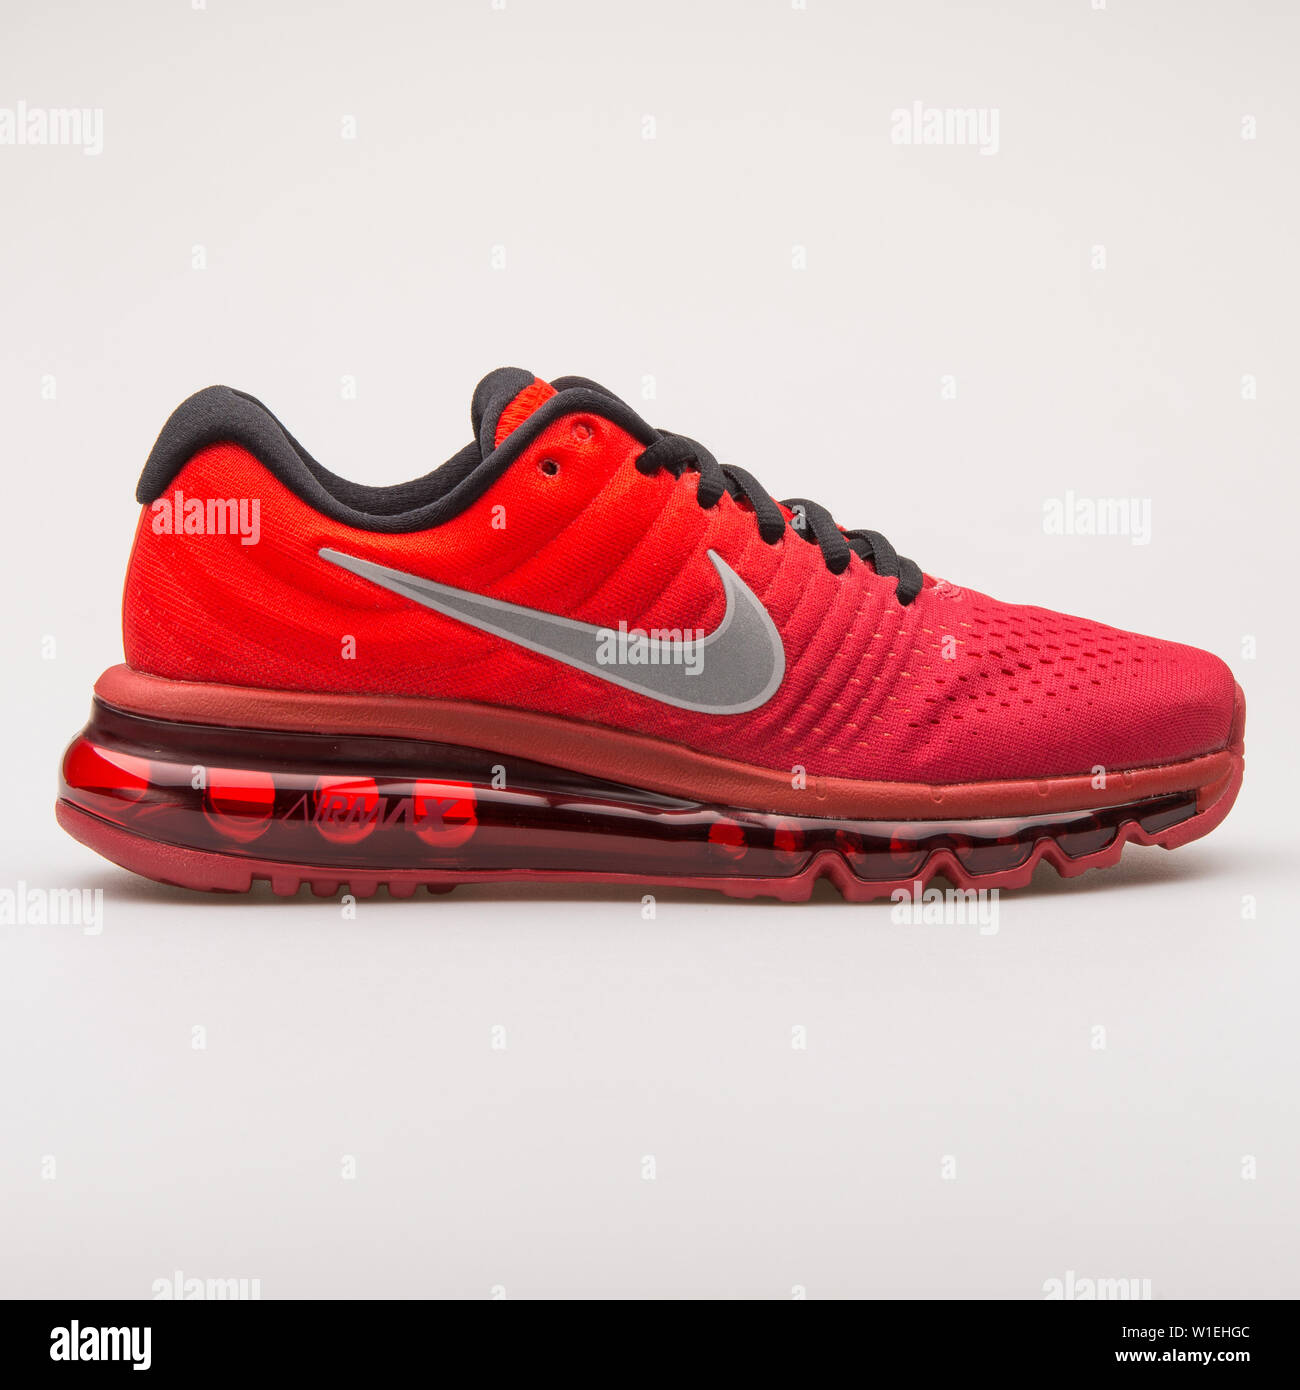 VIENNA, AUSTRIA - AUGUST 23, 2017: Nike Air Max 2017 gym red sneaker on  white background Stock Photo - Alamy